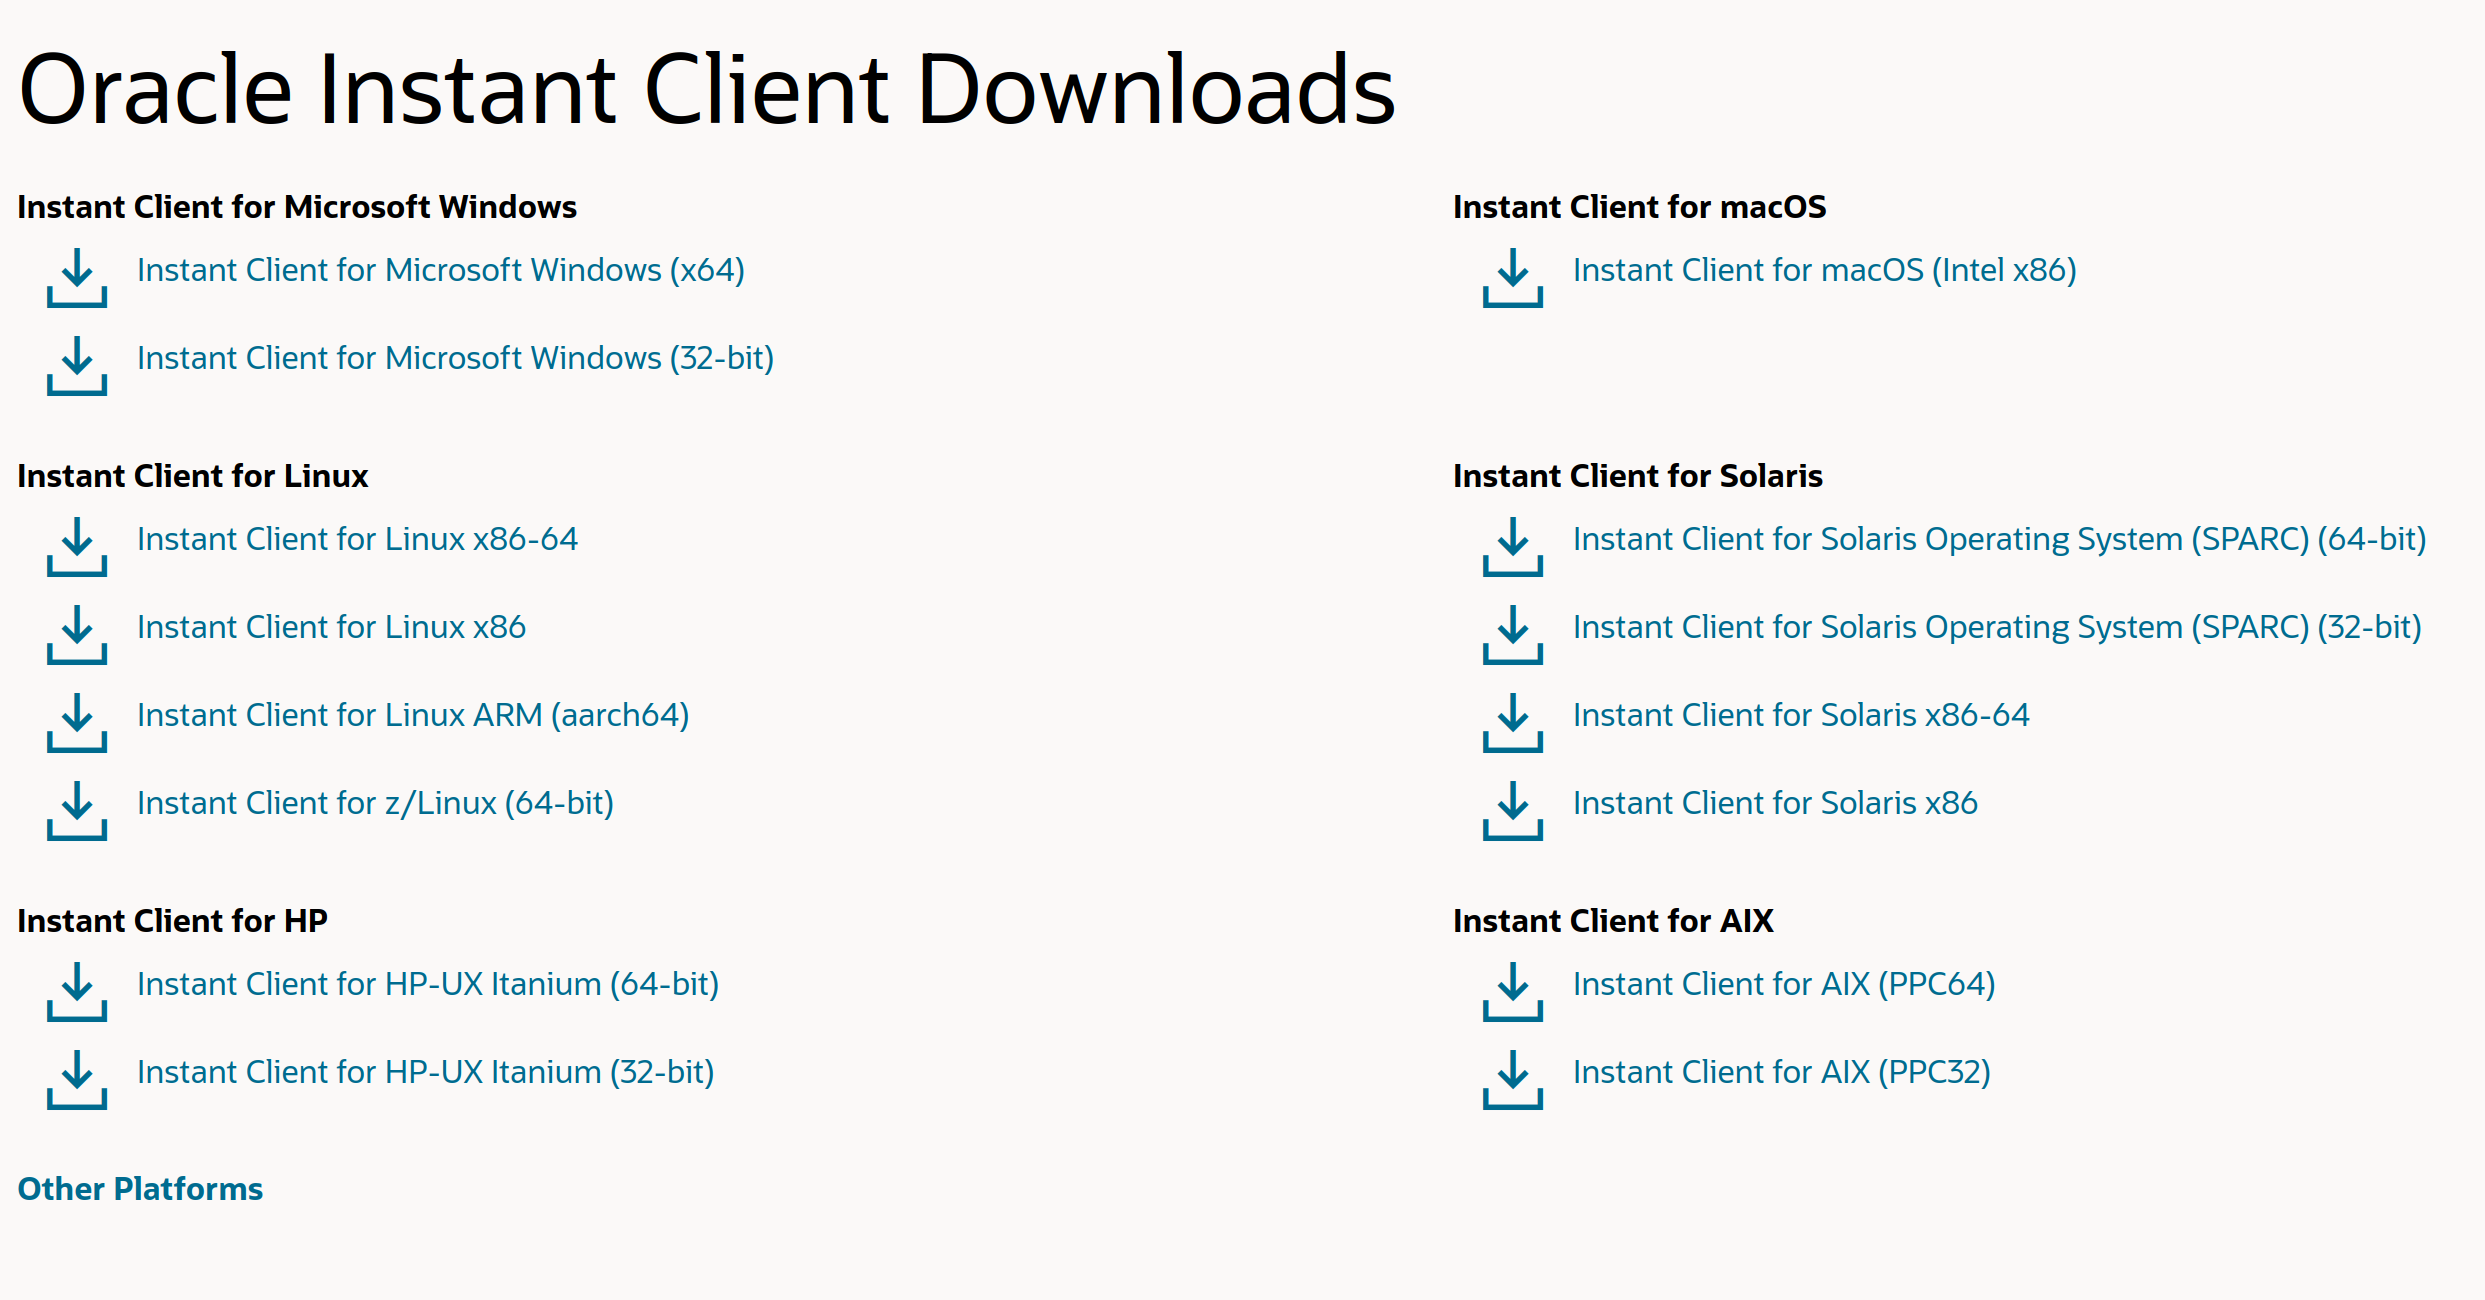 Oracle Instant Client download page